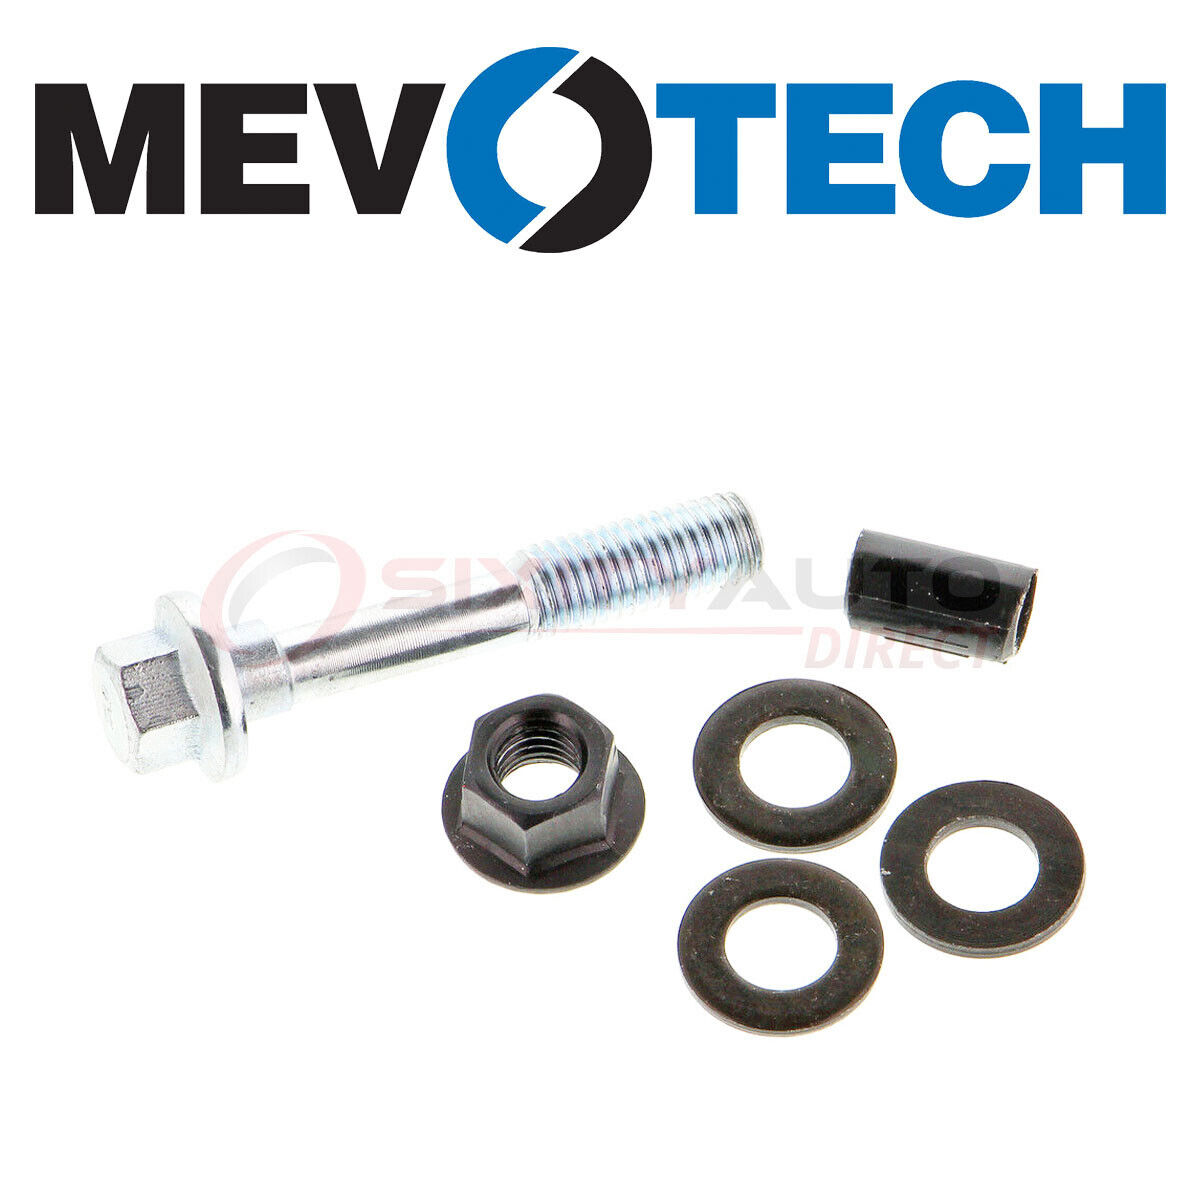 Mevotech OG Alignment Camber Kit for 1992-1994 Mitsubishi Expo 2.4L L4 - he